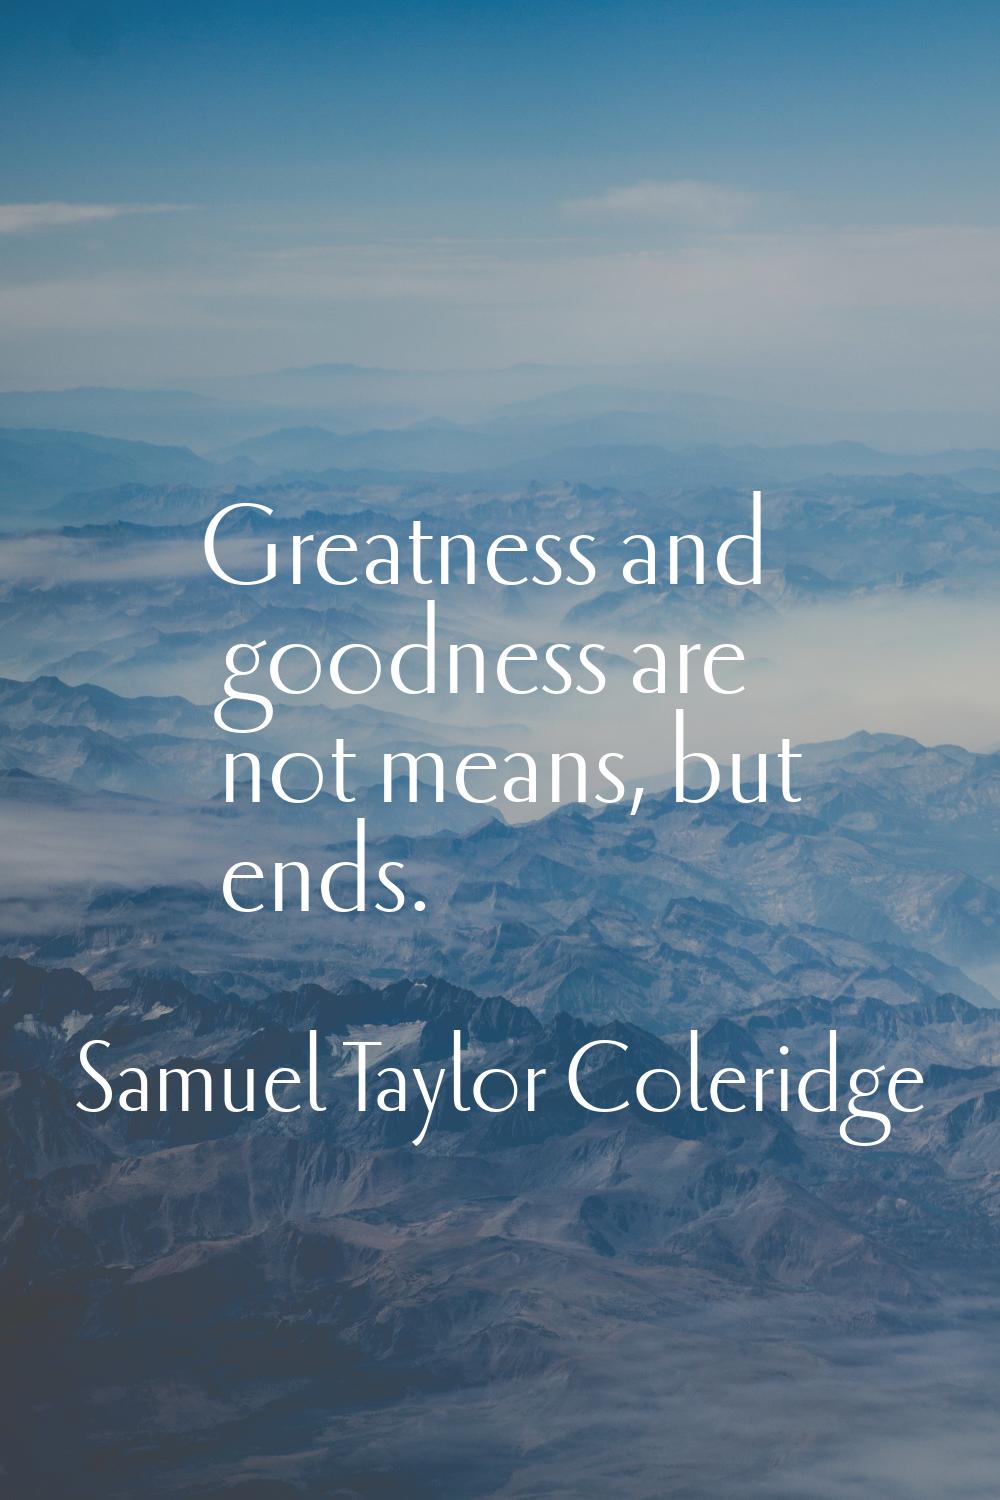 Greatness and goodness are not means, but ends.